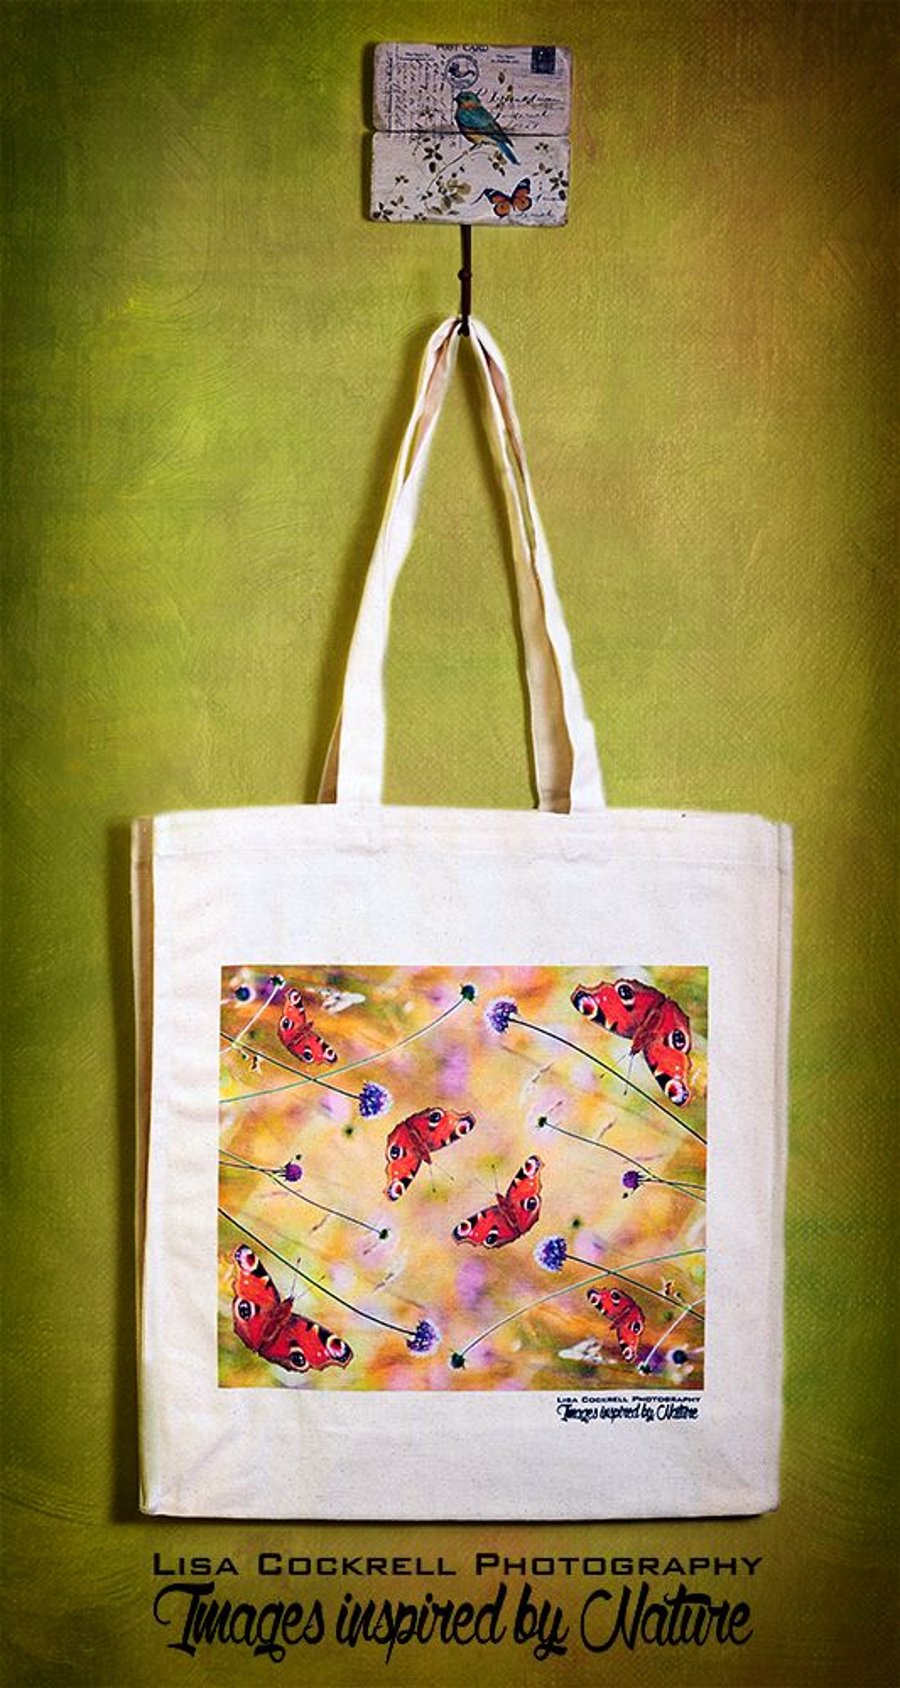 BUTTERFLY - TOTE BAGS INSPIRED BY NATURE FROM LISA COCKRELL PHOTOGRAPHY